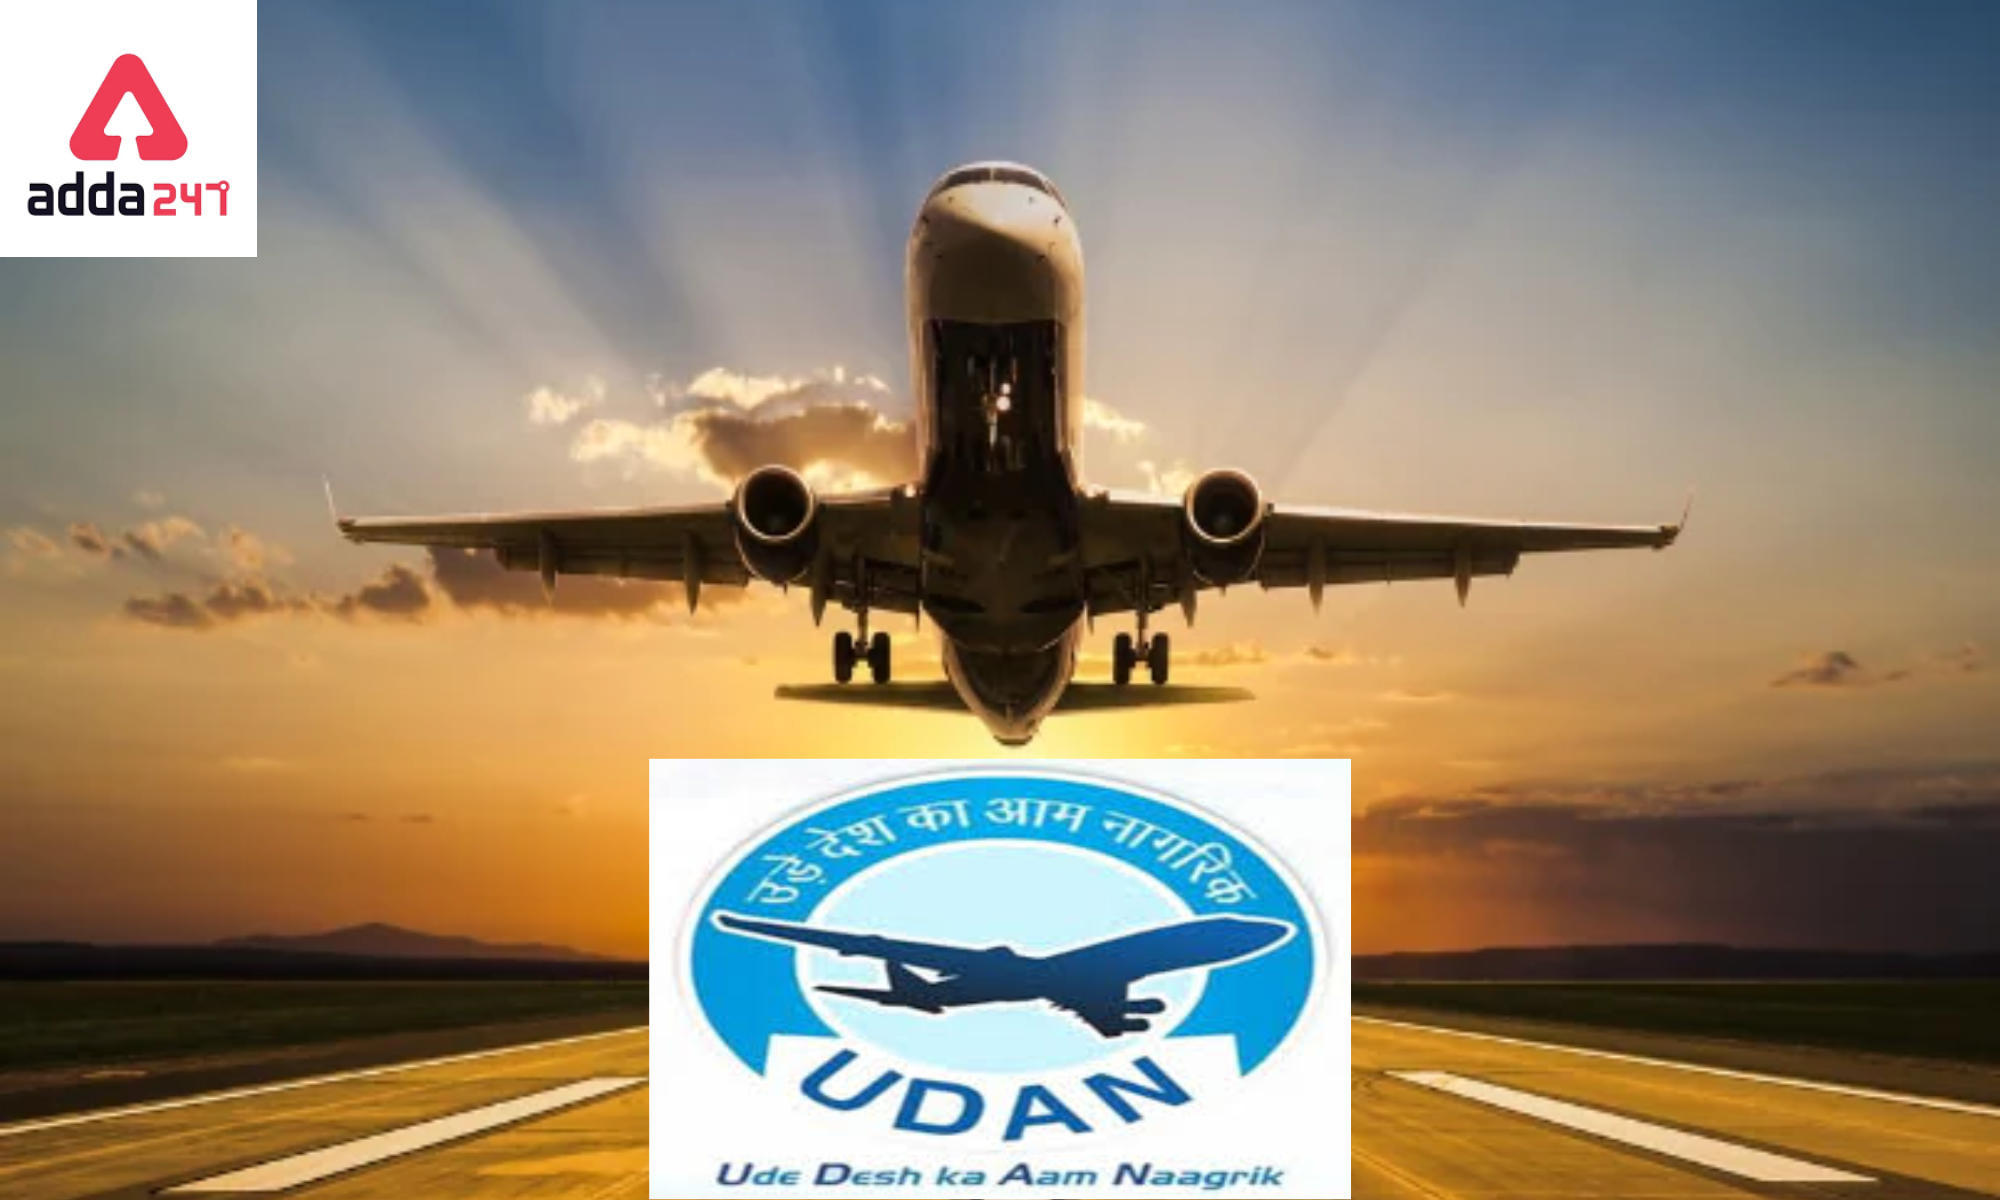 UDAN celebrating its 5th anniversary in the year 2022